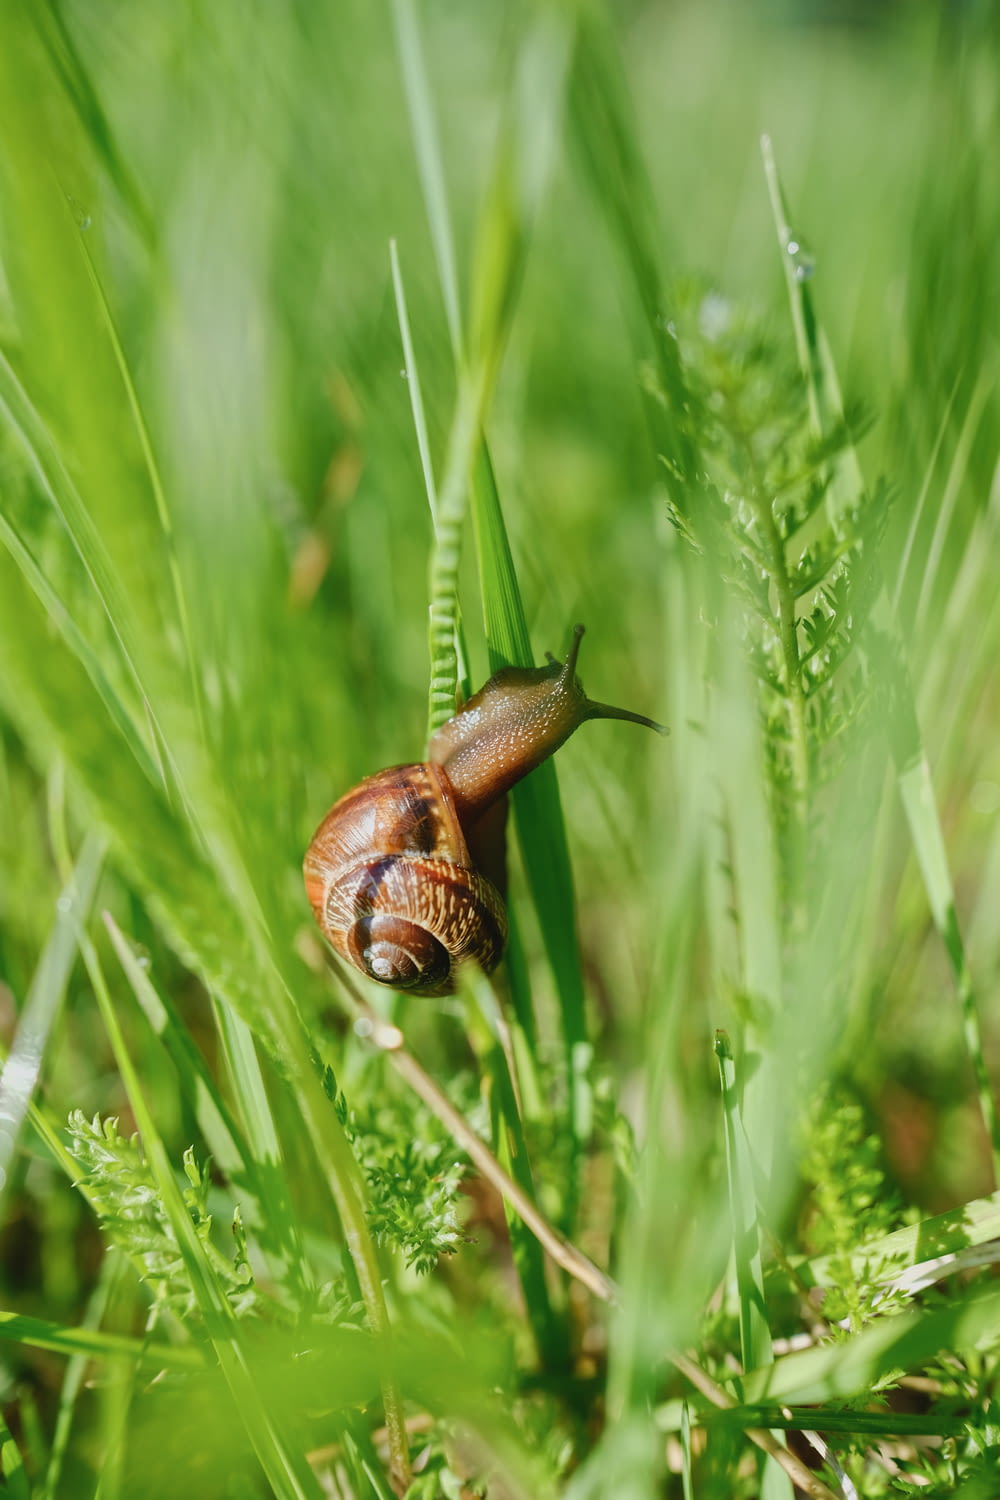 a snail crawling in the grass on a sunny day